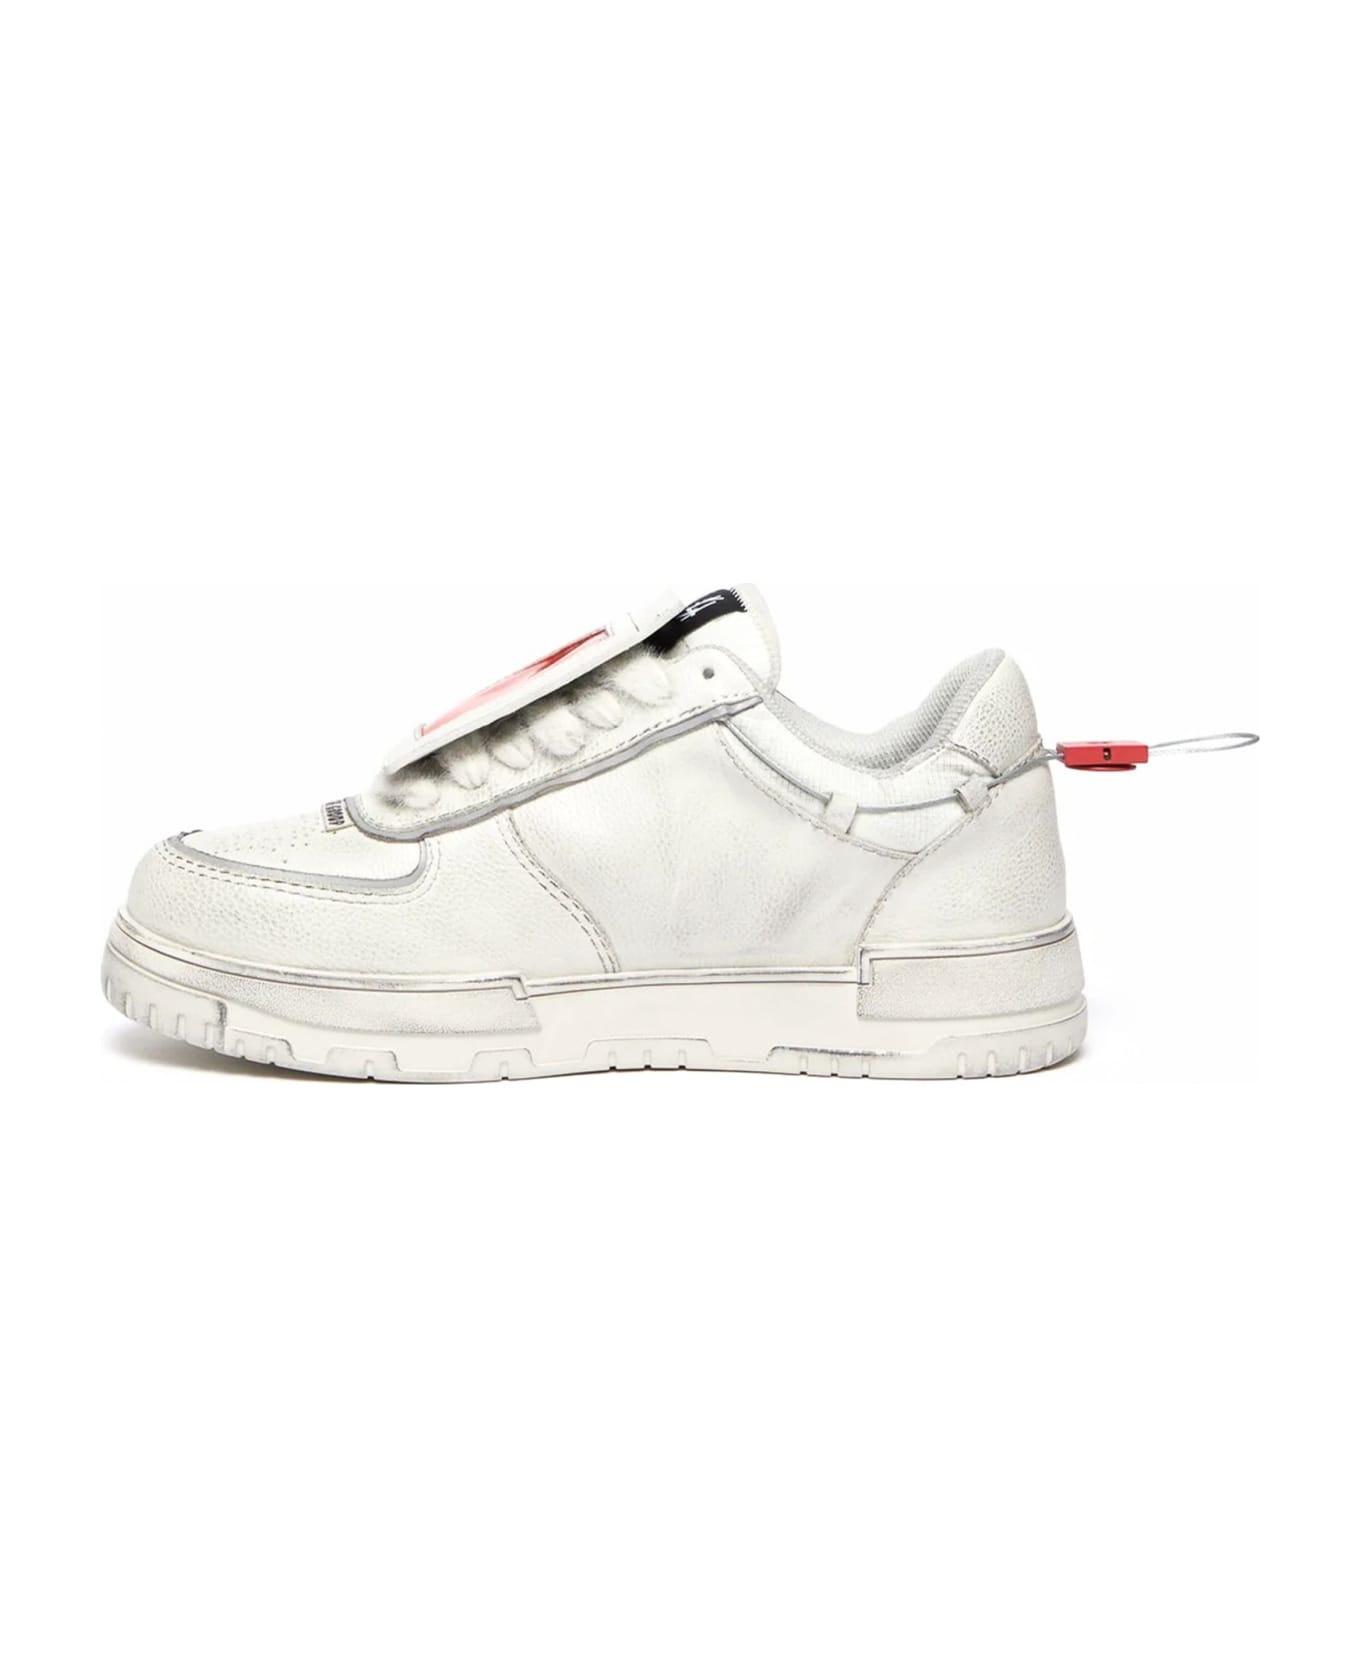 44 Label Group Sneakers White - White